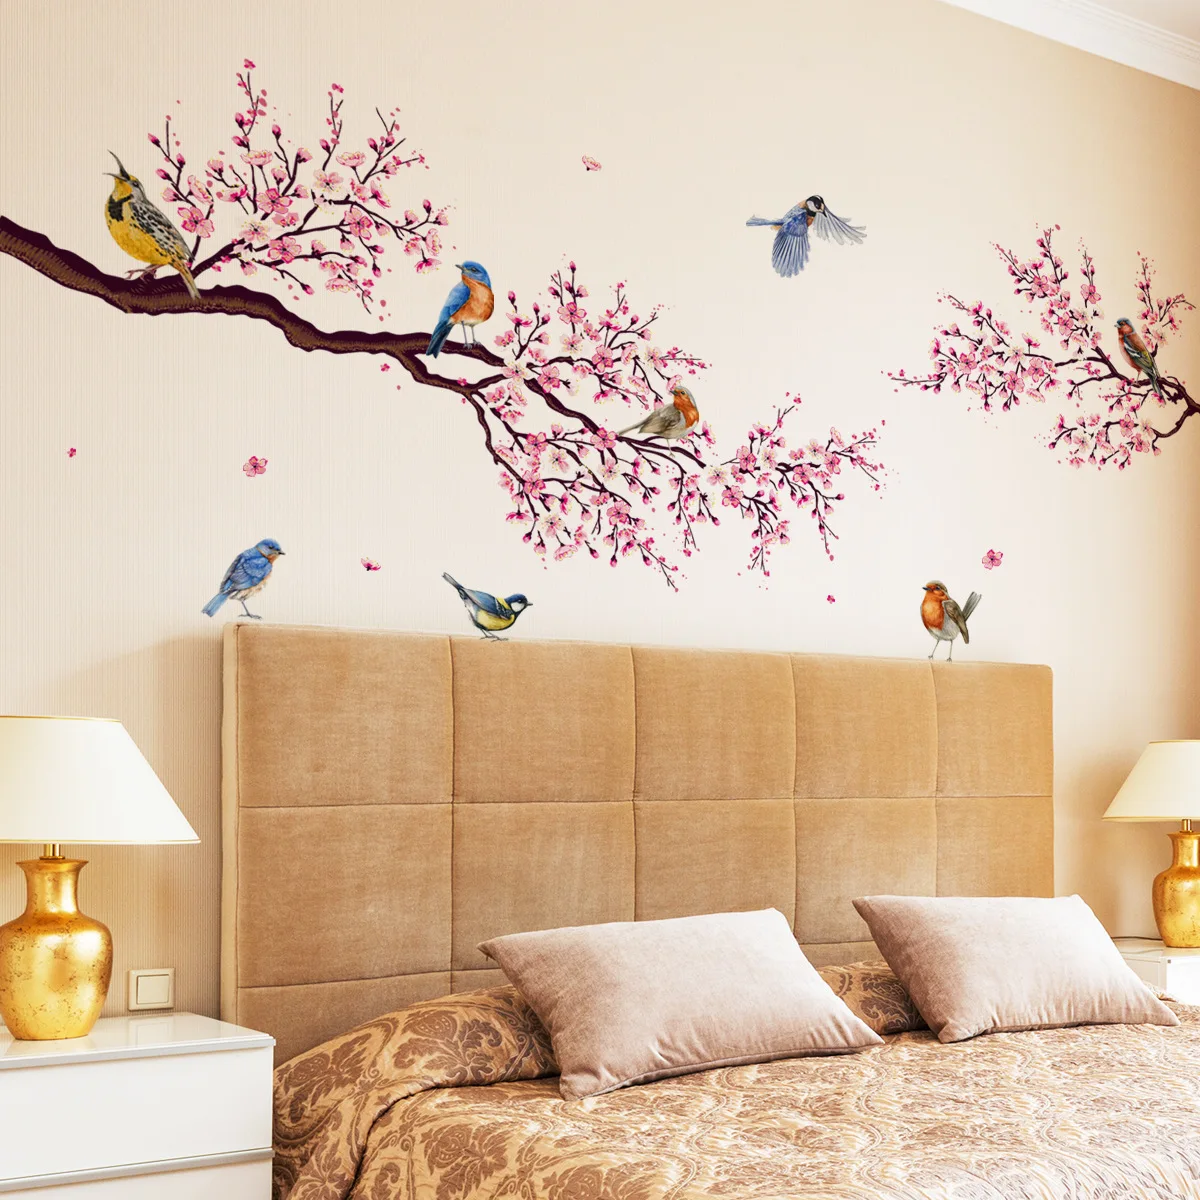 Twigs Bird Small House Bird's Nest Wall Stickers For Children's Room Bedroom Study Decorative Decal Mural Peel&Stick Home Decor